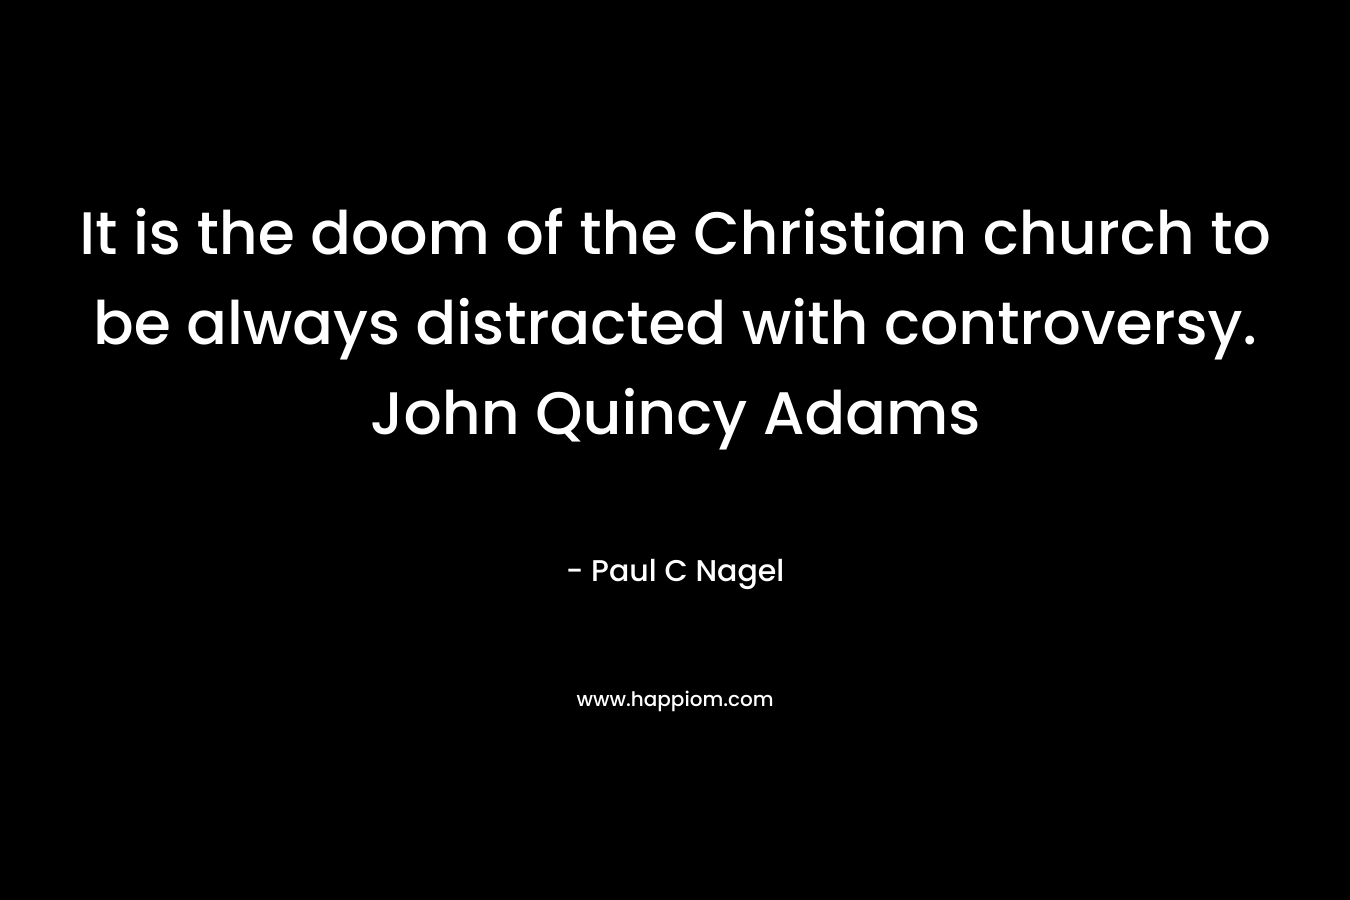 It is the doom of the Christian church to be always distracted with controversy. John Quincy Adams – Paul C Nagel